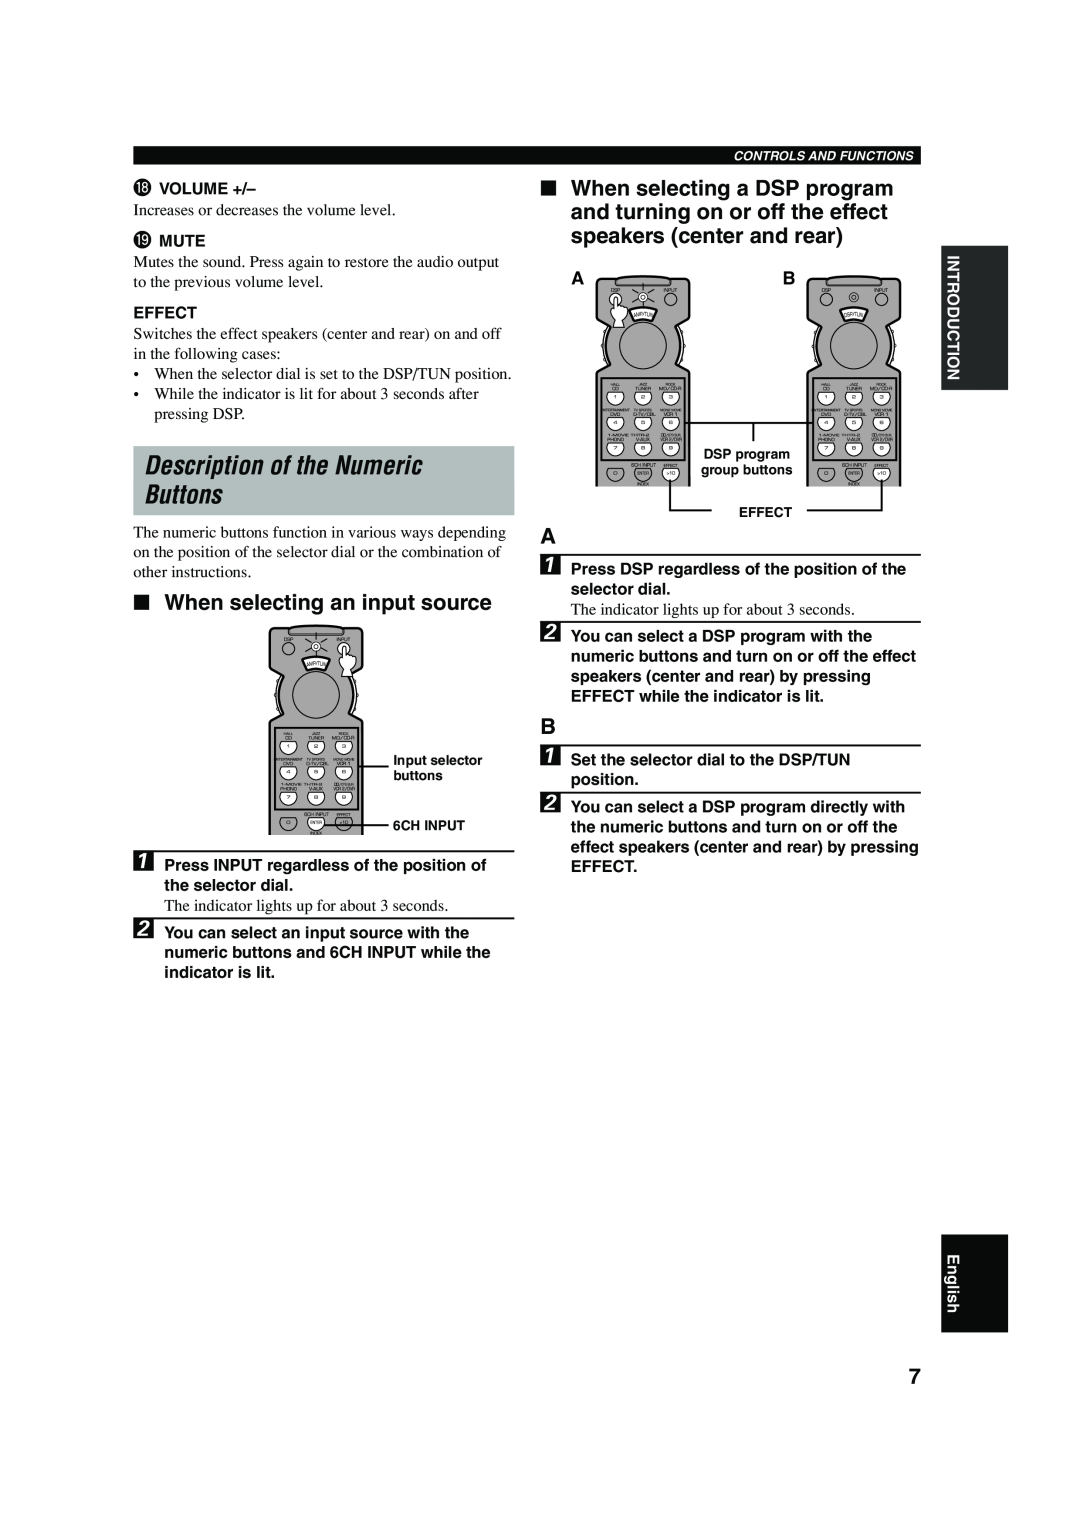 Yamaha RX-V620RDS owner manual Description of the Numeric Buttons, When selecting an input source, iVOLUME +, oMUTE, Effect 